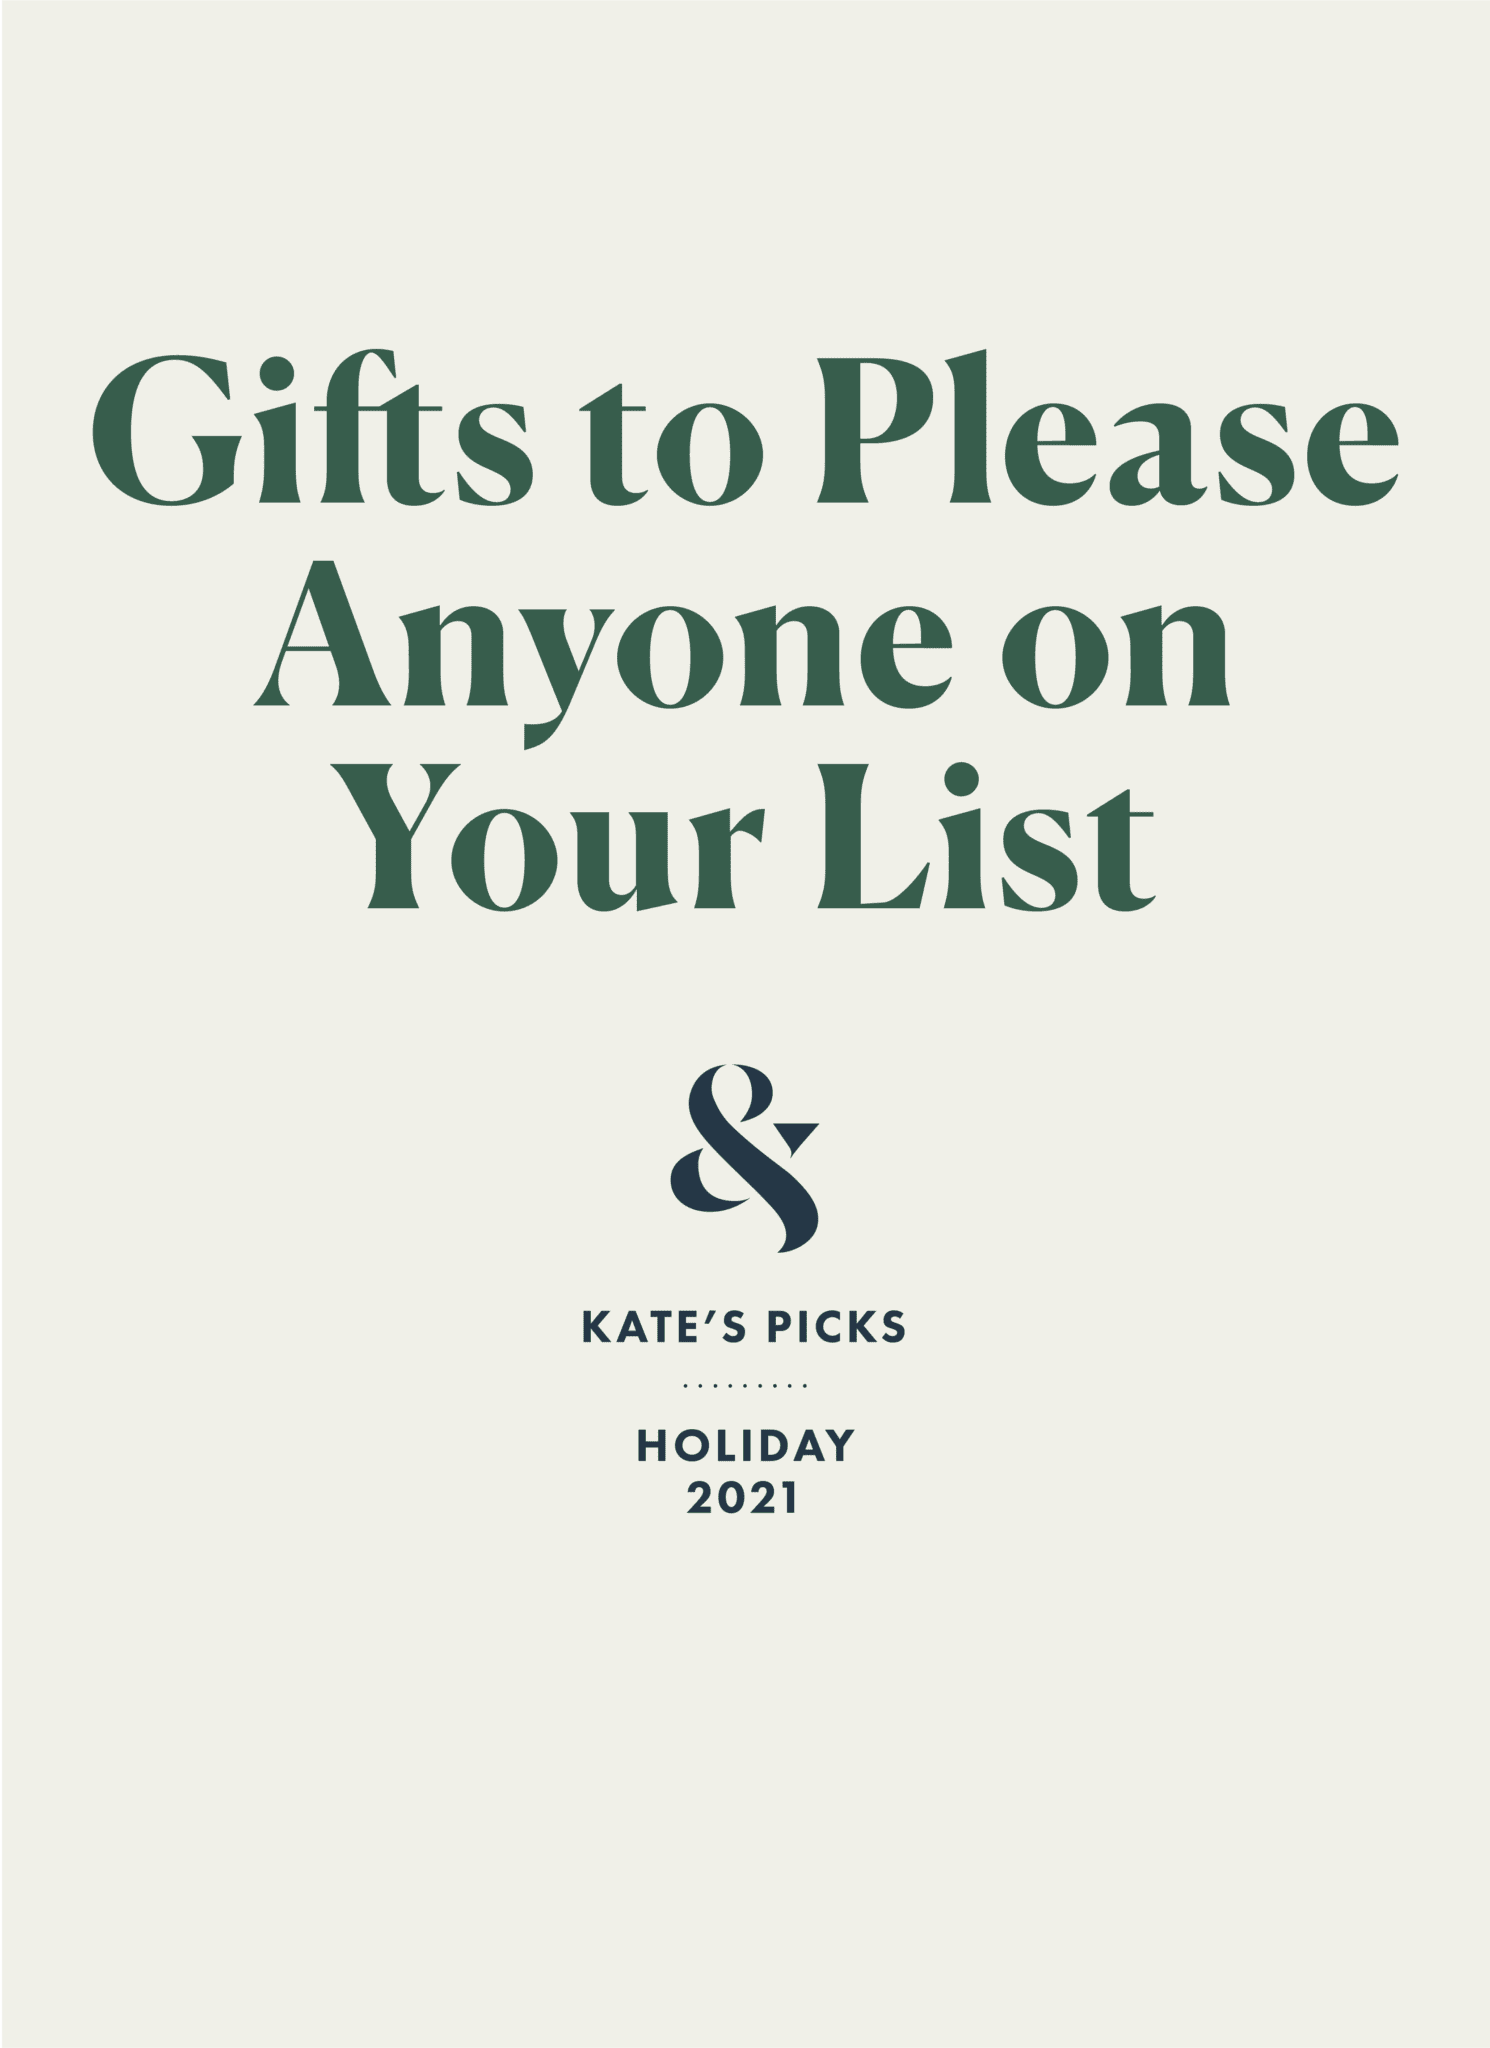 2021 Holiday Gift Guide: Gifts to Please Anyone on Your List